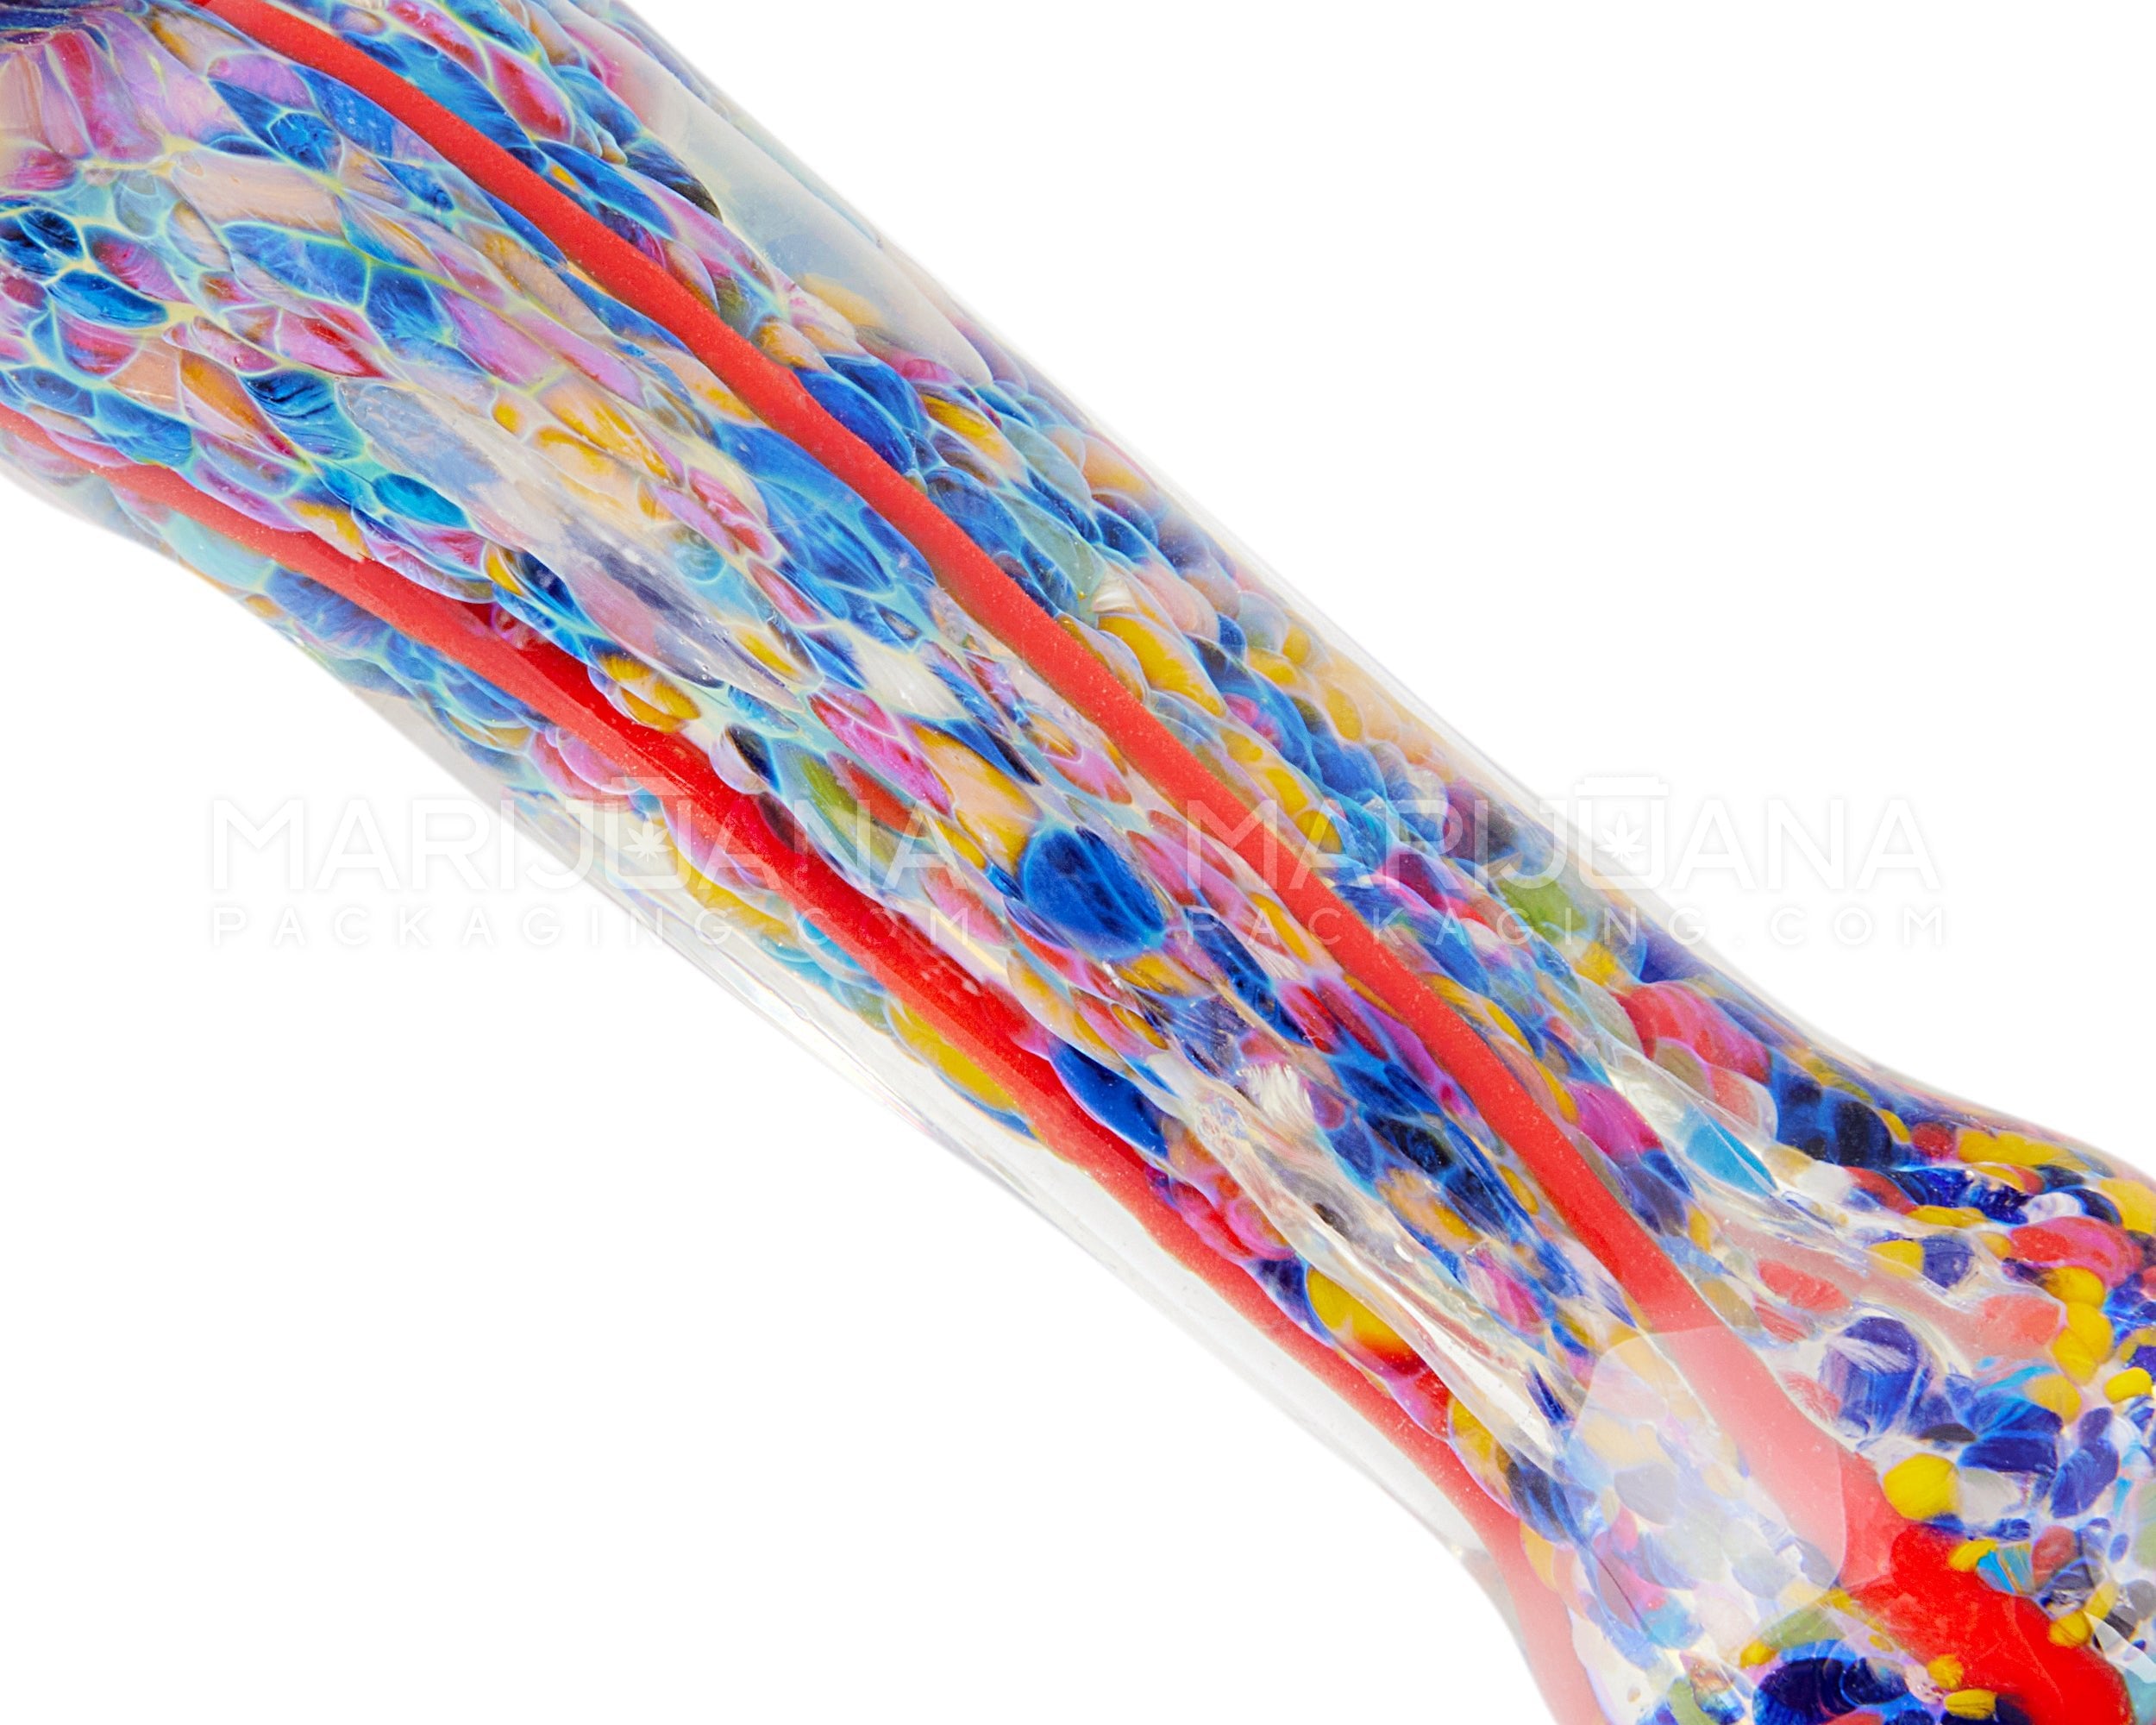 Frit & Fumed Striped Spoon Hand Pipe w/ Double Knockers | 5in Long - Glass - Assorted - 3